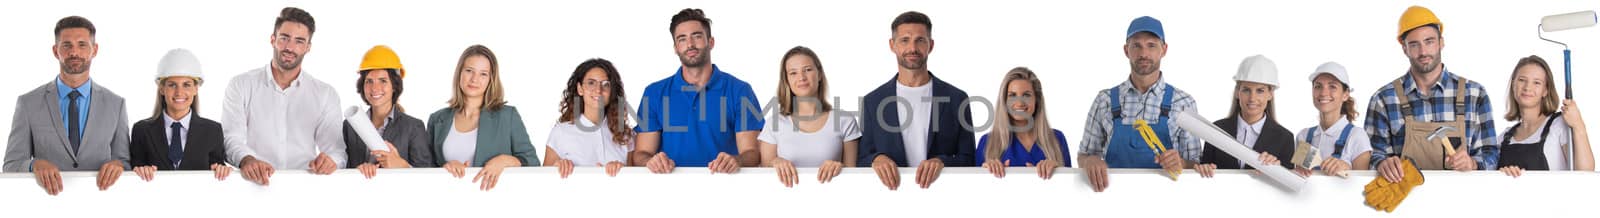 Group of diverse professionals presenting empty banner isolated on white background business construction industry